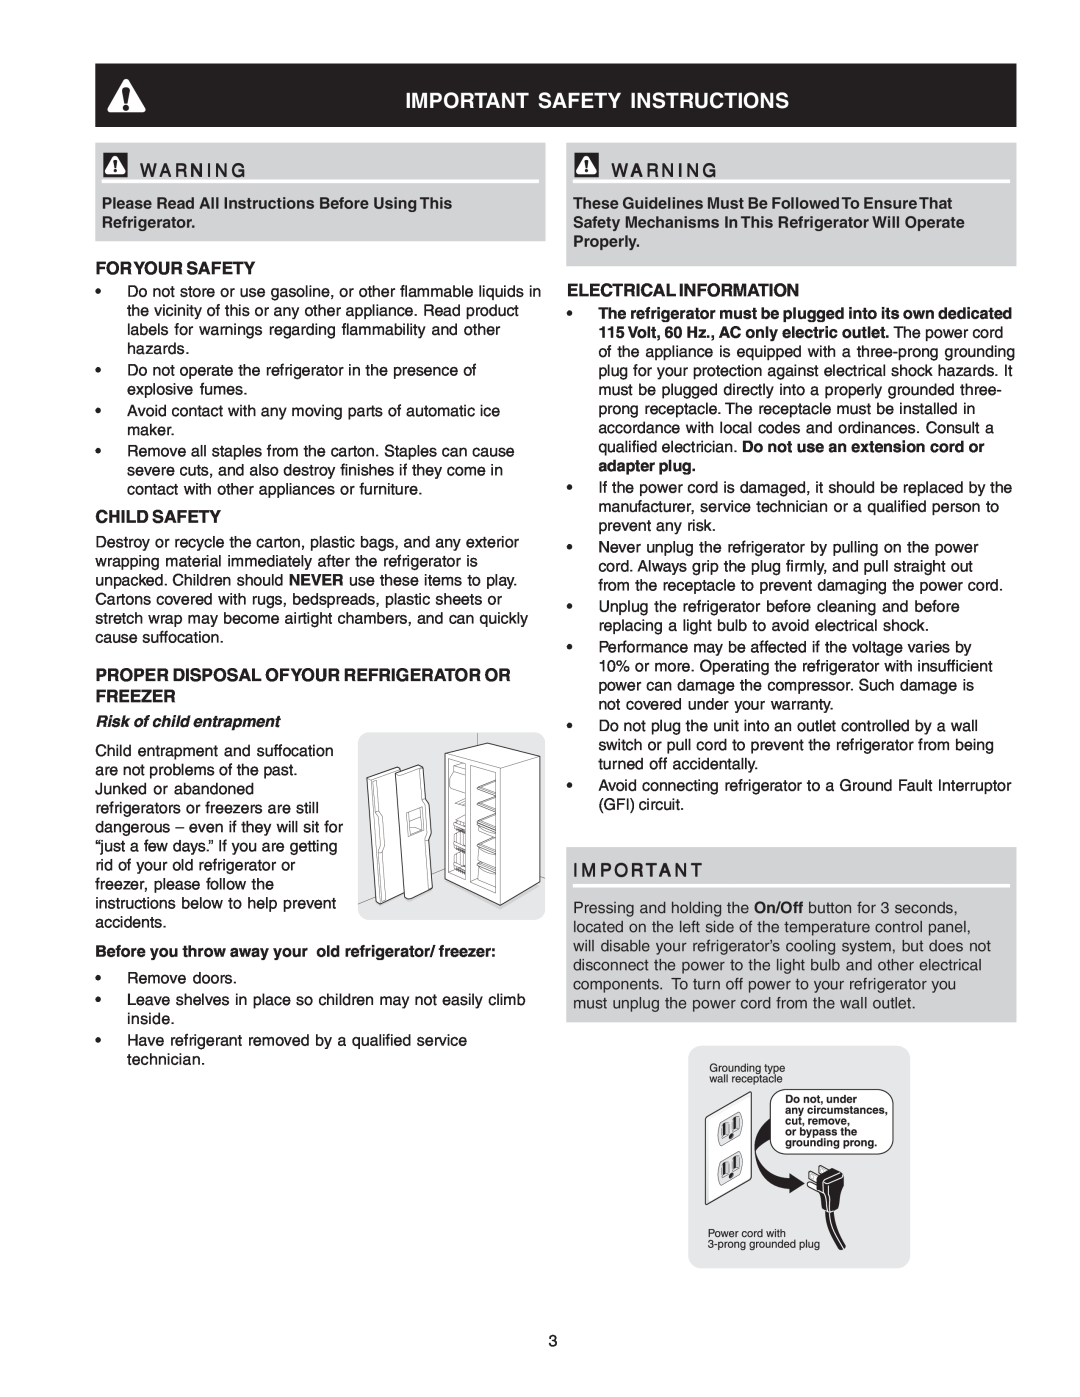 Frigidaire 241721000 manual Important Safety Instructions, Foryour Safety, Child Safety, Electrical Information 